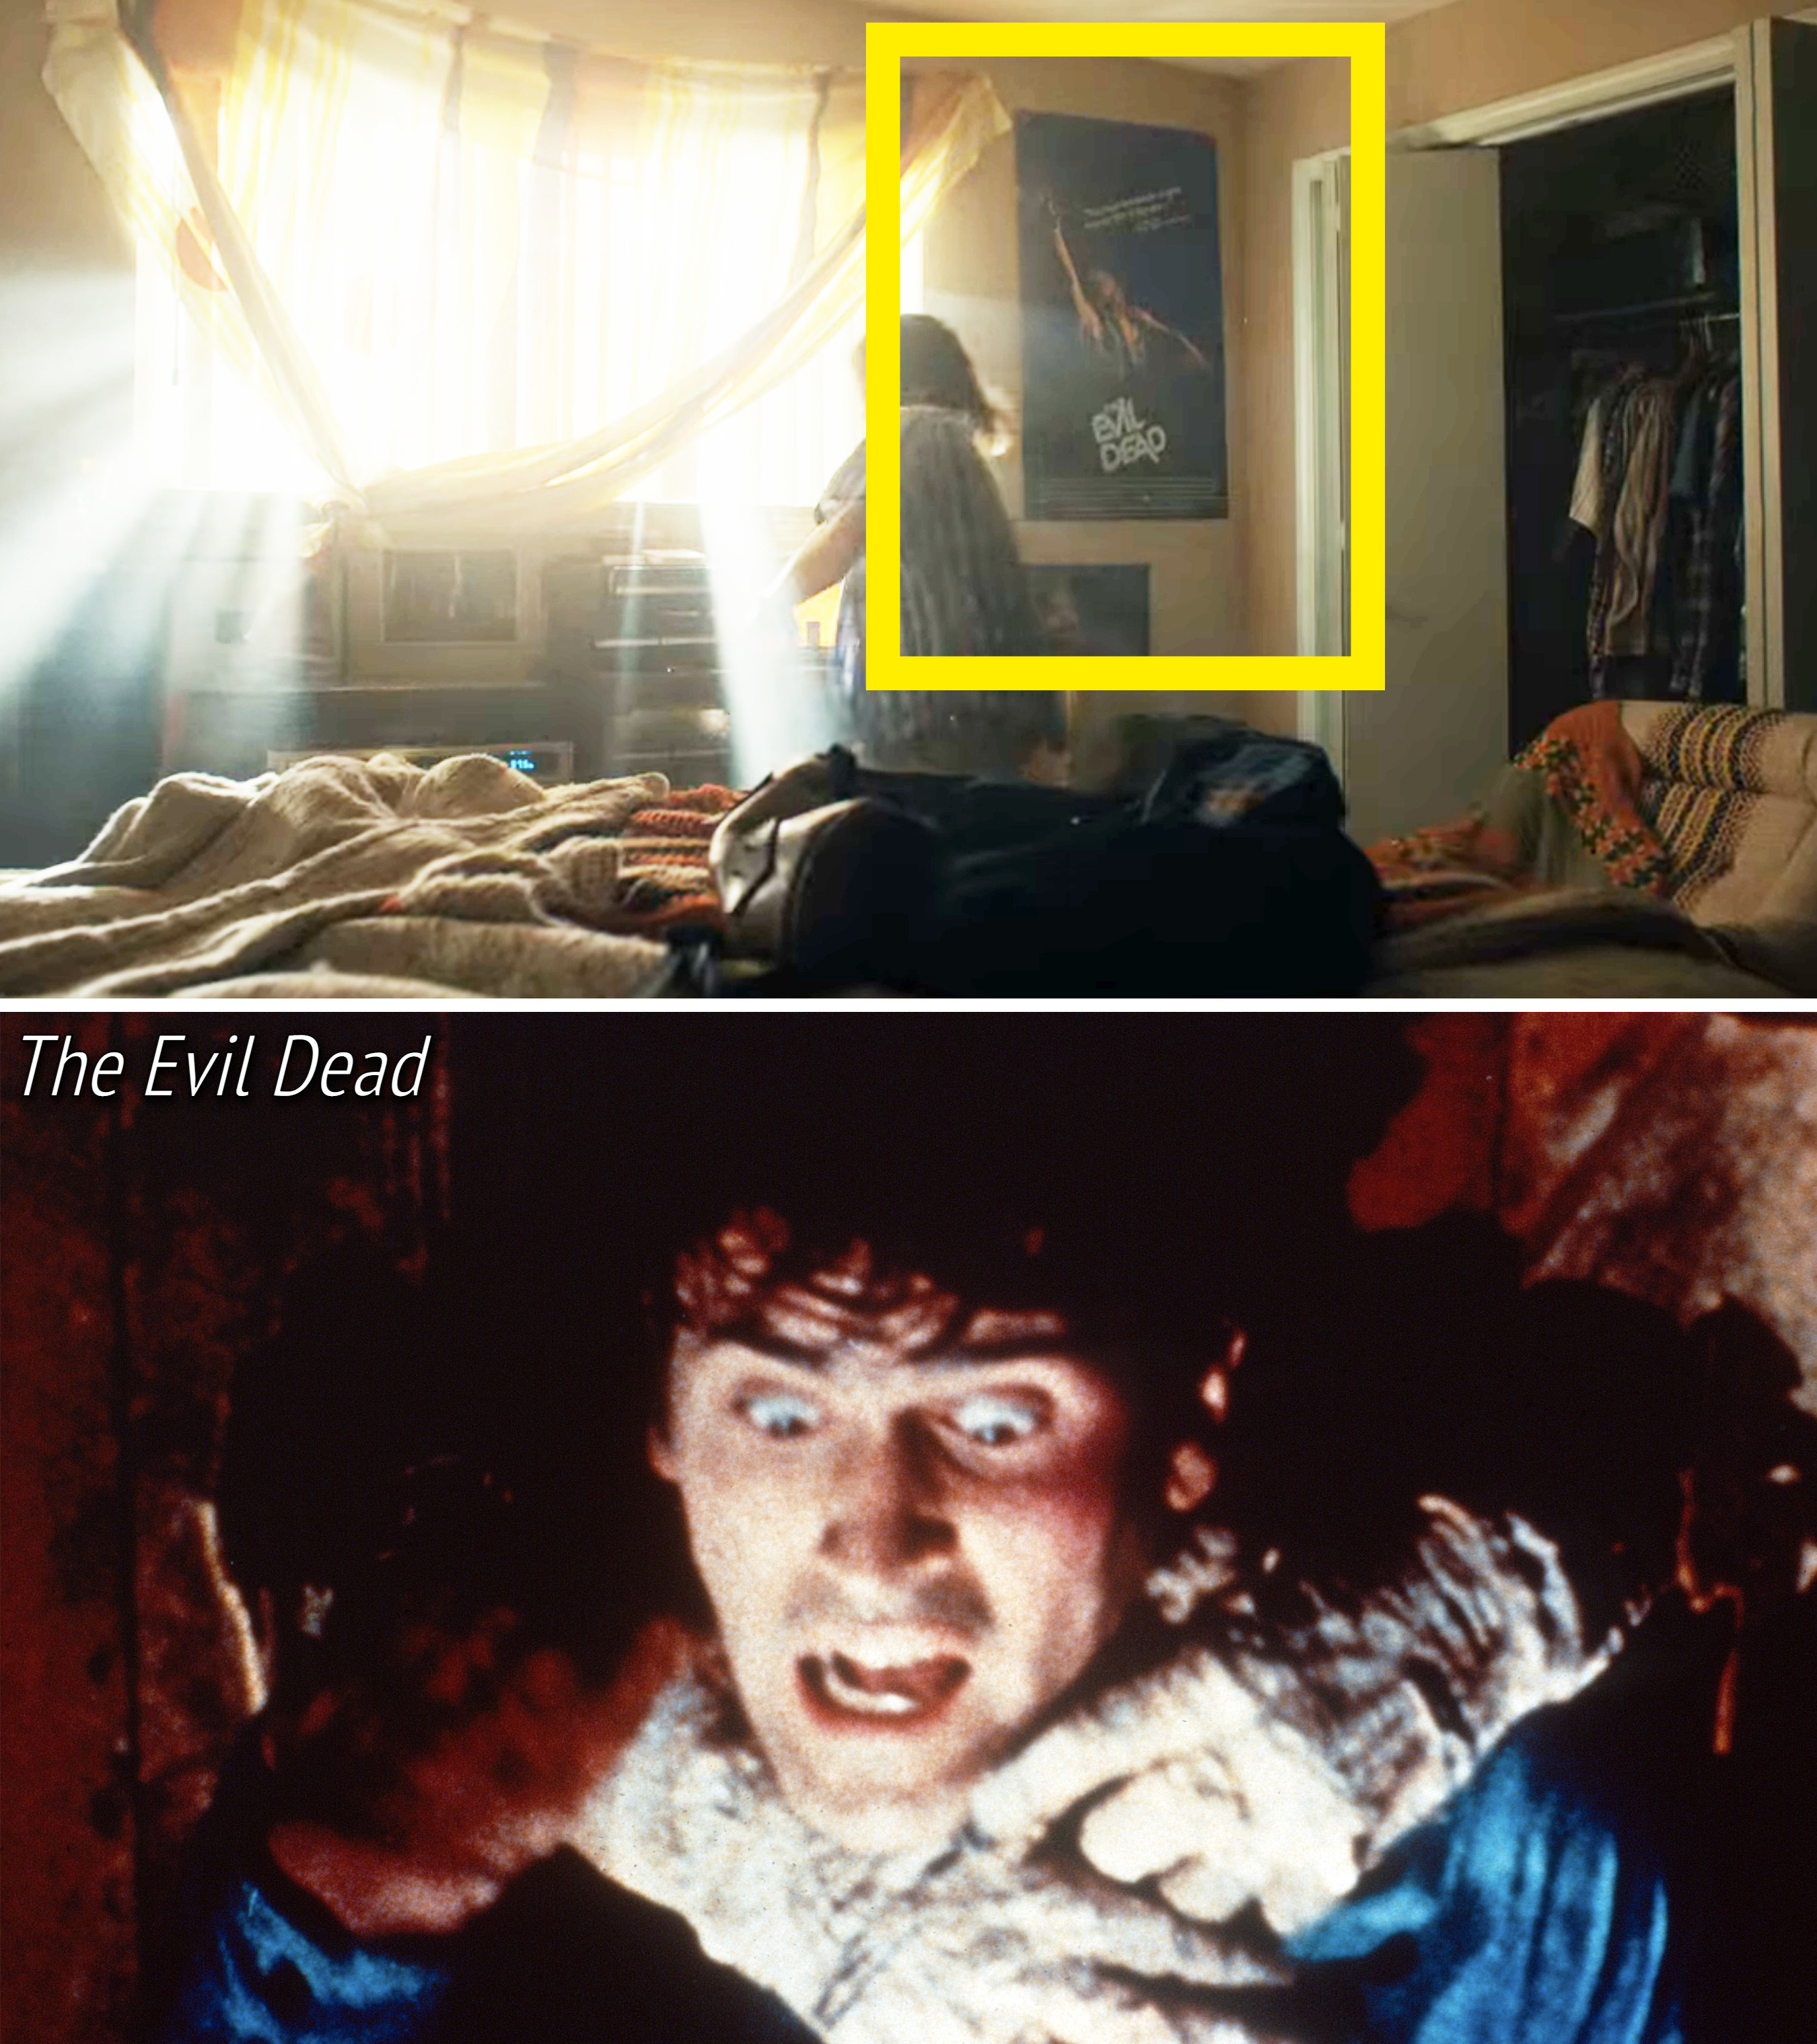 &quot;The Evil Dead&quot; poster; a scene from the movie